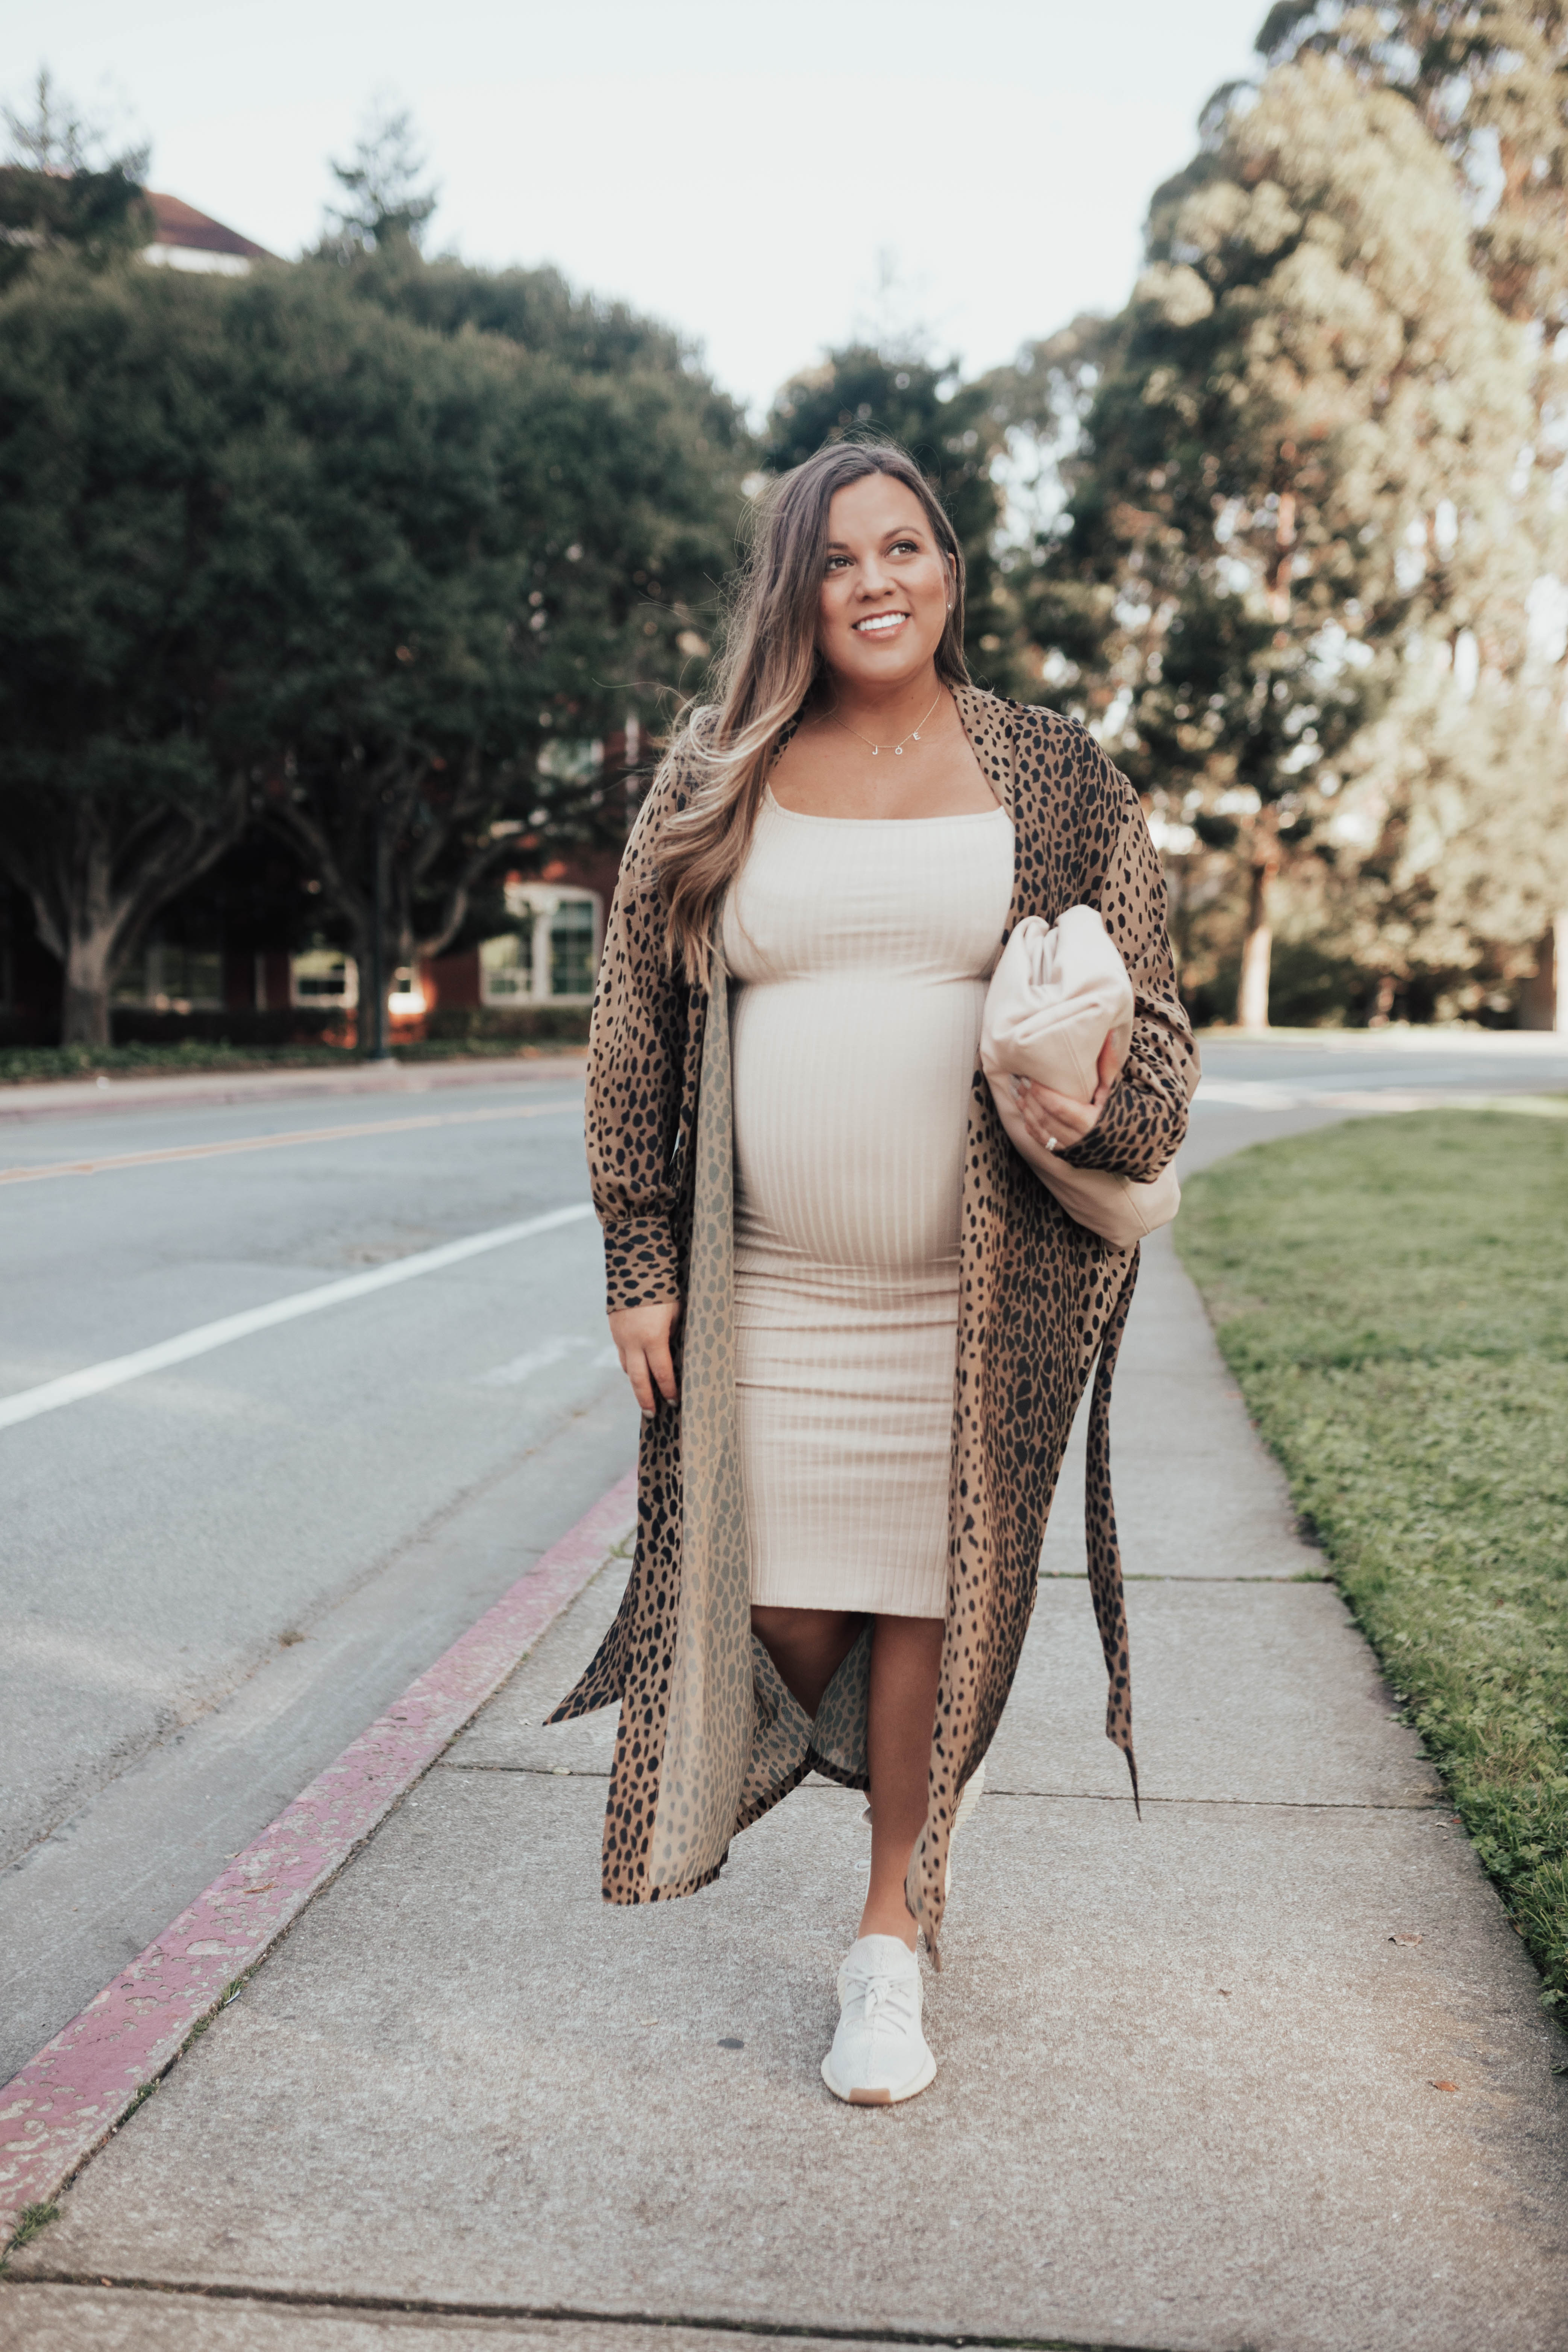 Blogger Ashley Zeal from Two Peas in a Prada shares all the details from her Baby Shower. From the pampas grass, to the Yeezys, she is covering all of the specifics!